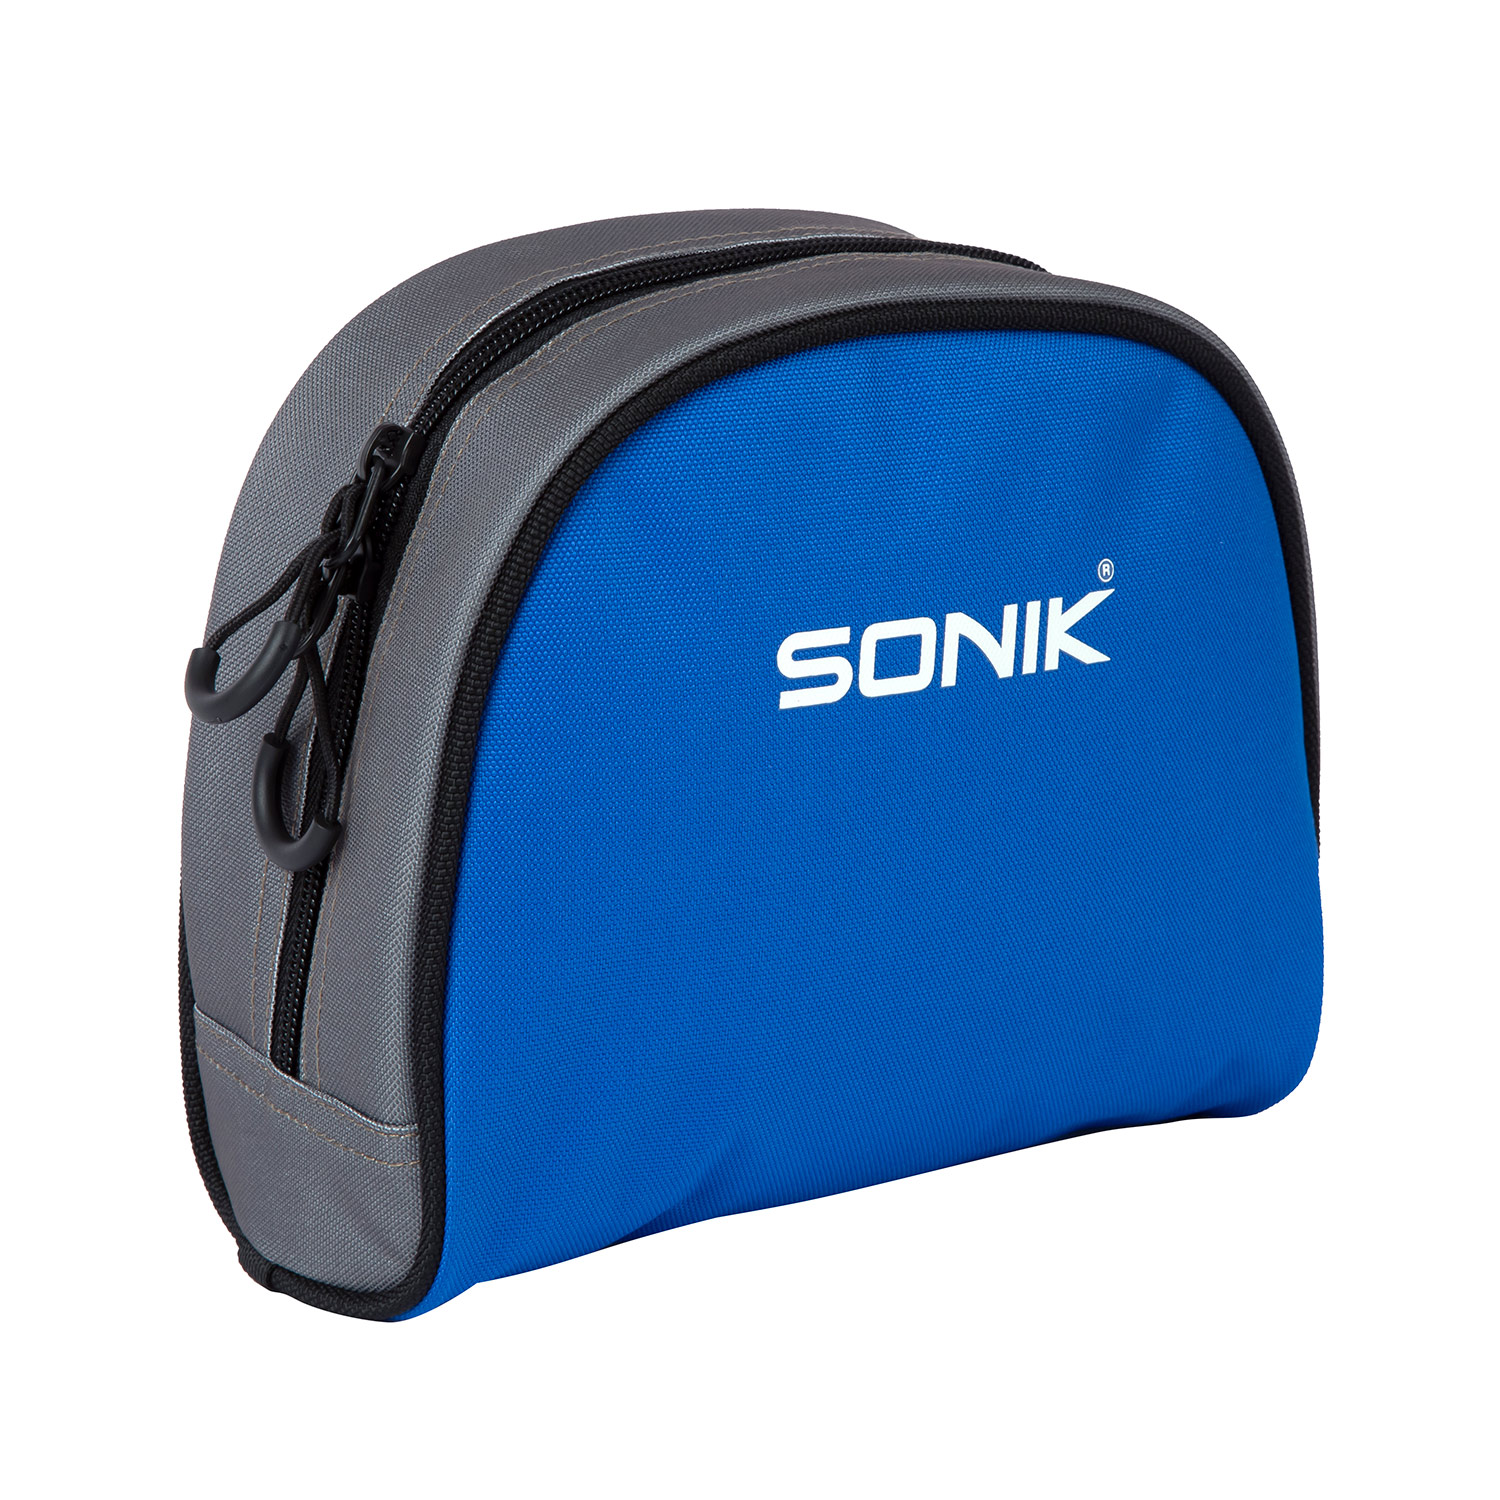 Sonik Fixed Spool Reel Case - Veals Mail Order